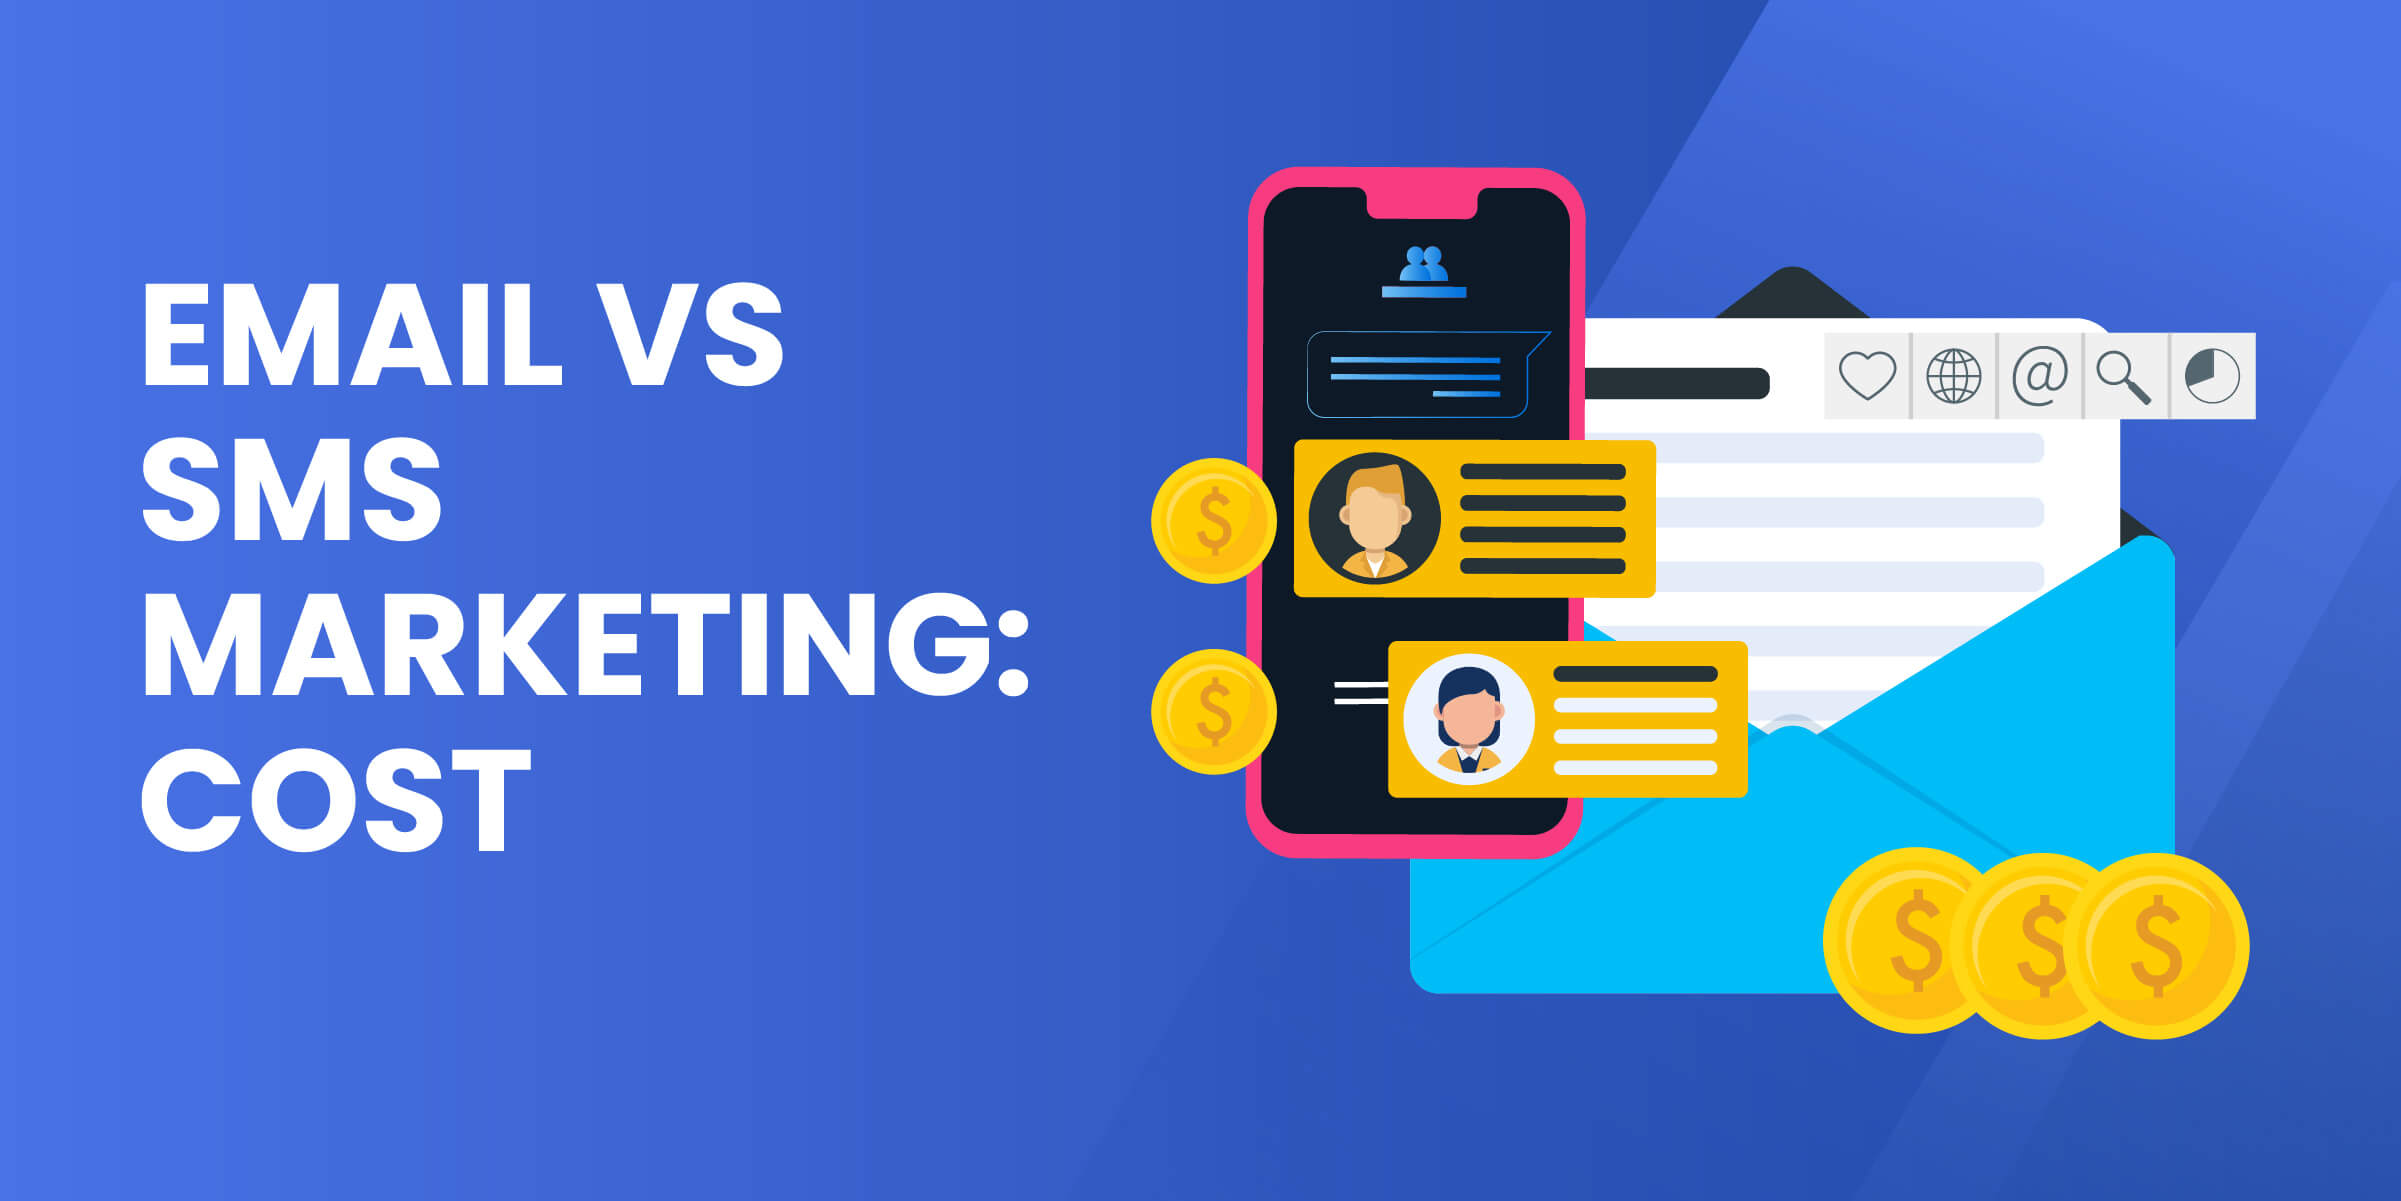 Email vs SMS Marketing Cost